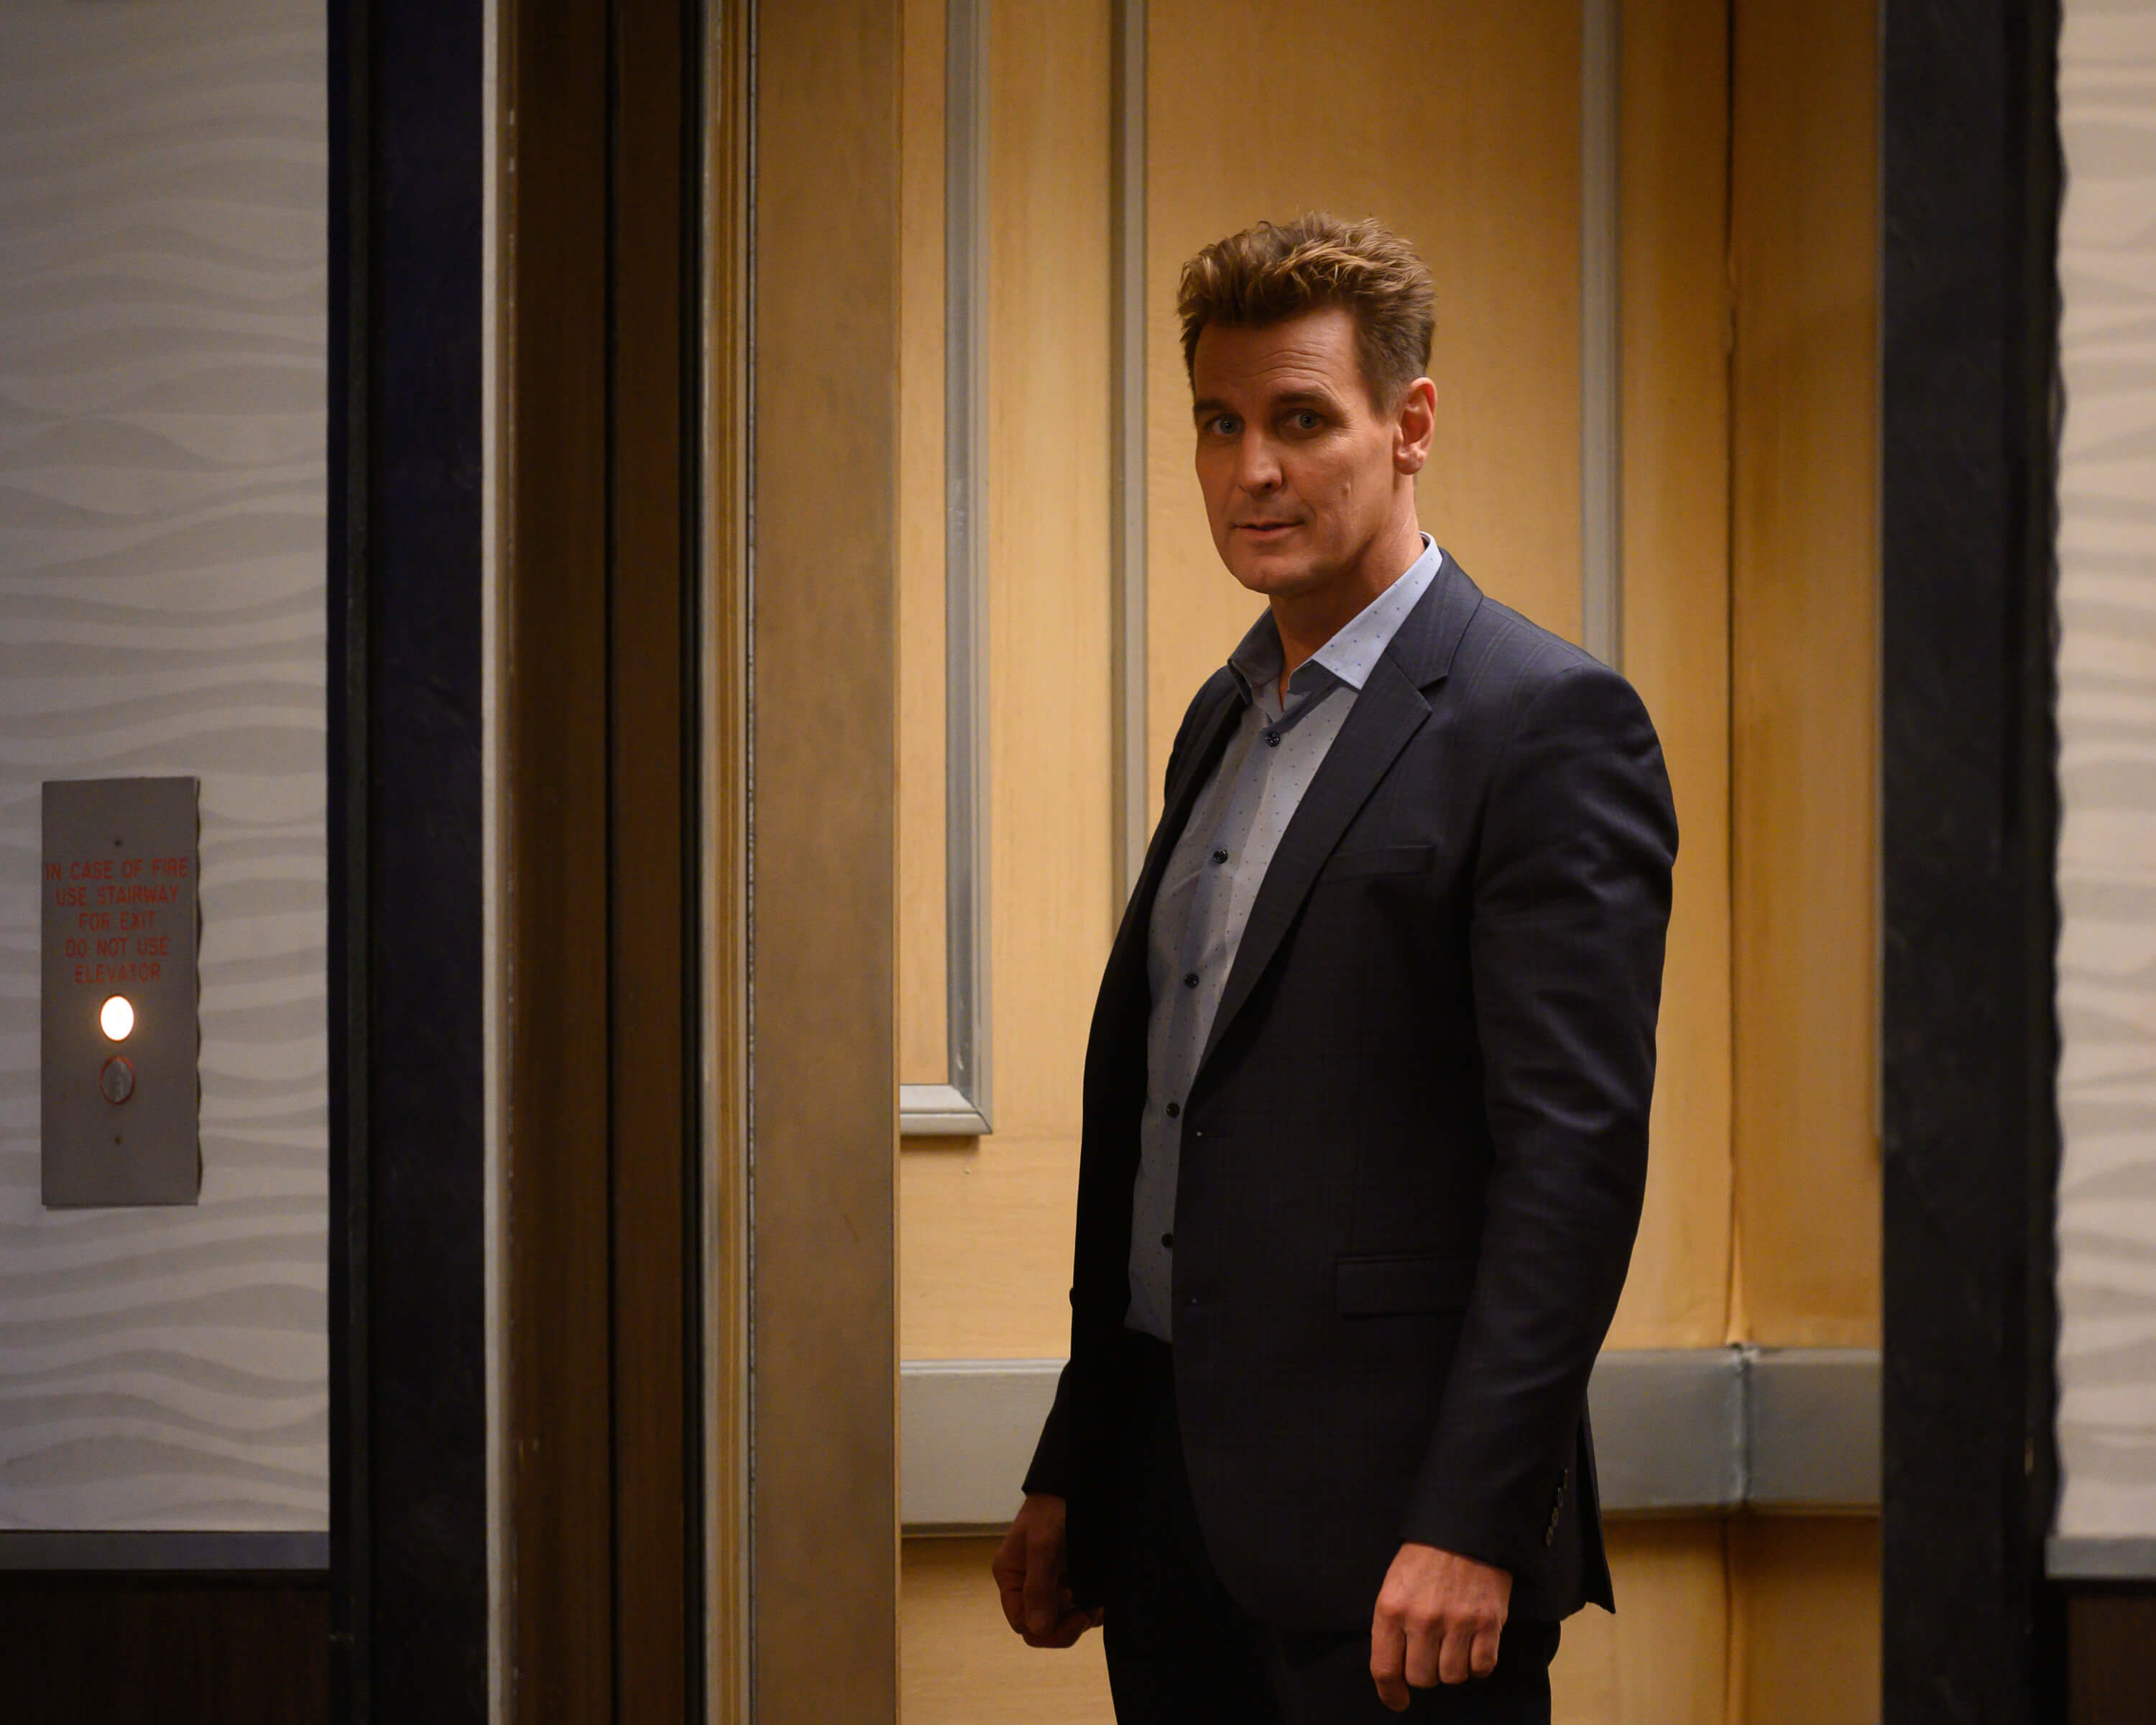 'General Hospital' star Ingo Rademacher dressed in a blue suit and shirt; in a scene from the soap opera.